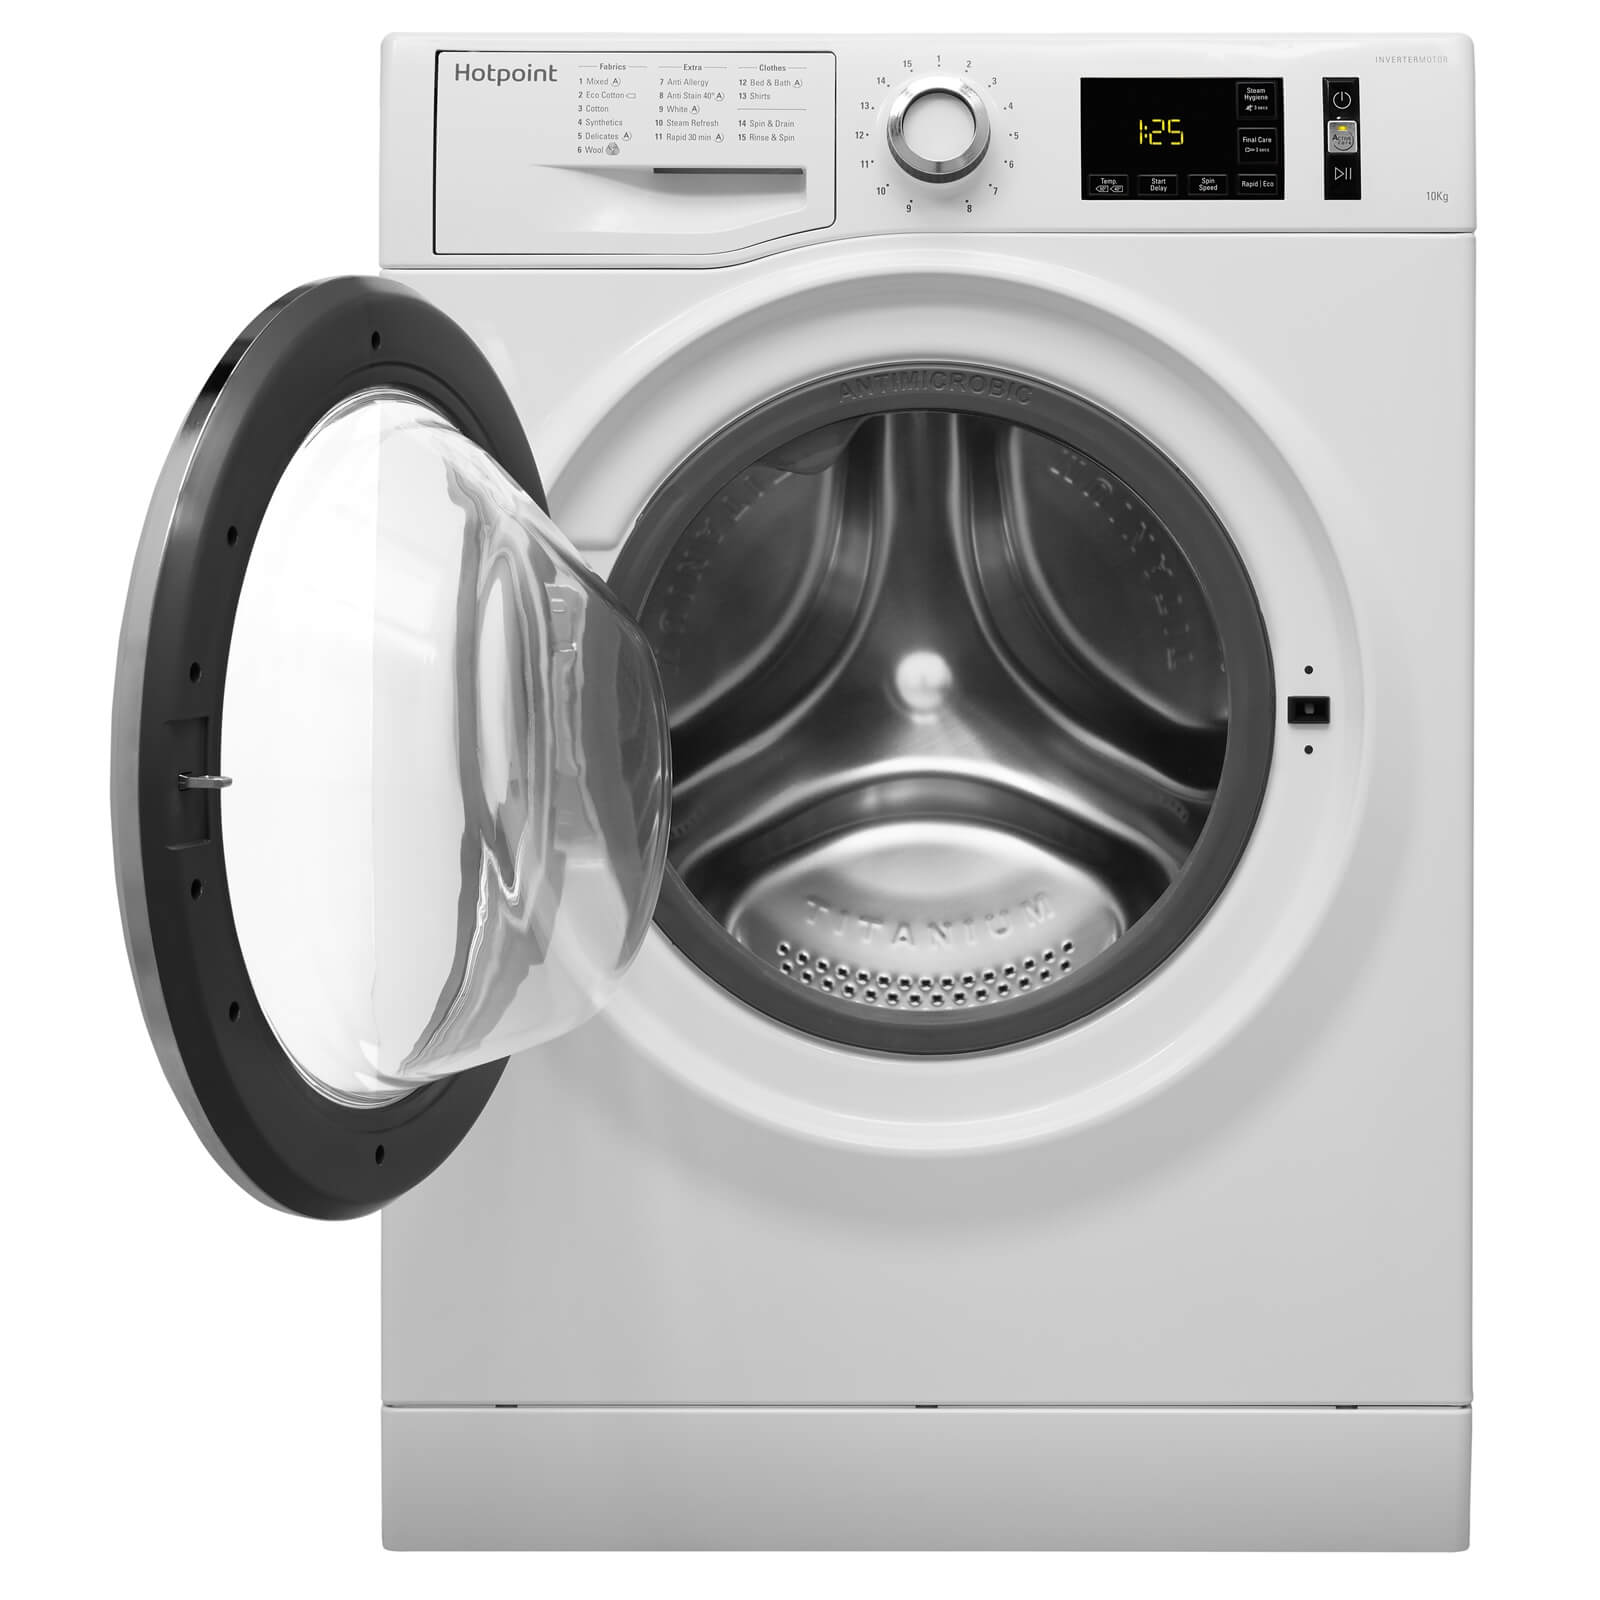 Hotpoint ActiveCare NM11 1045 WC A Washing Machine - White